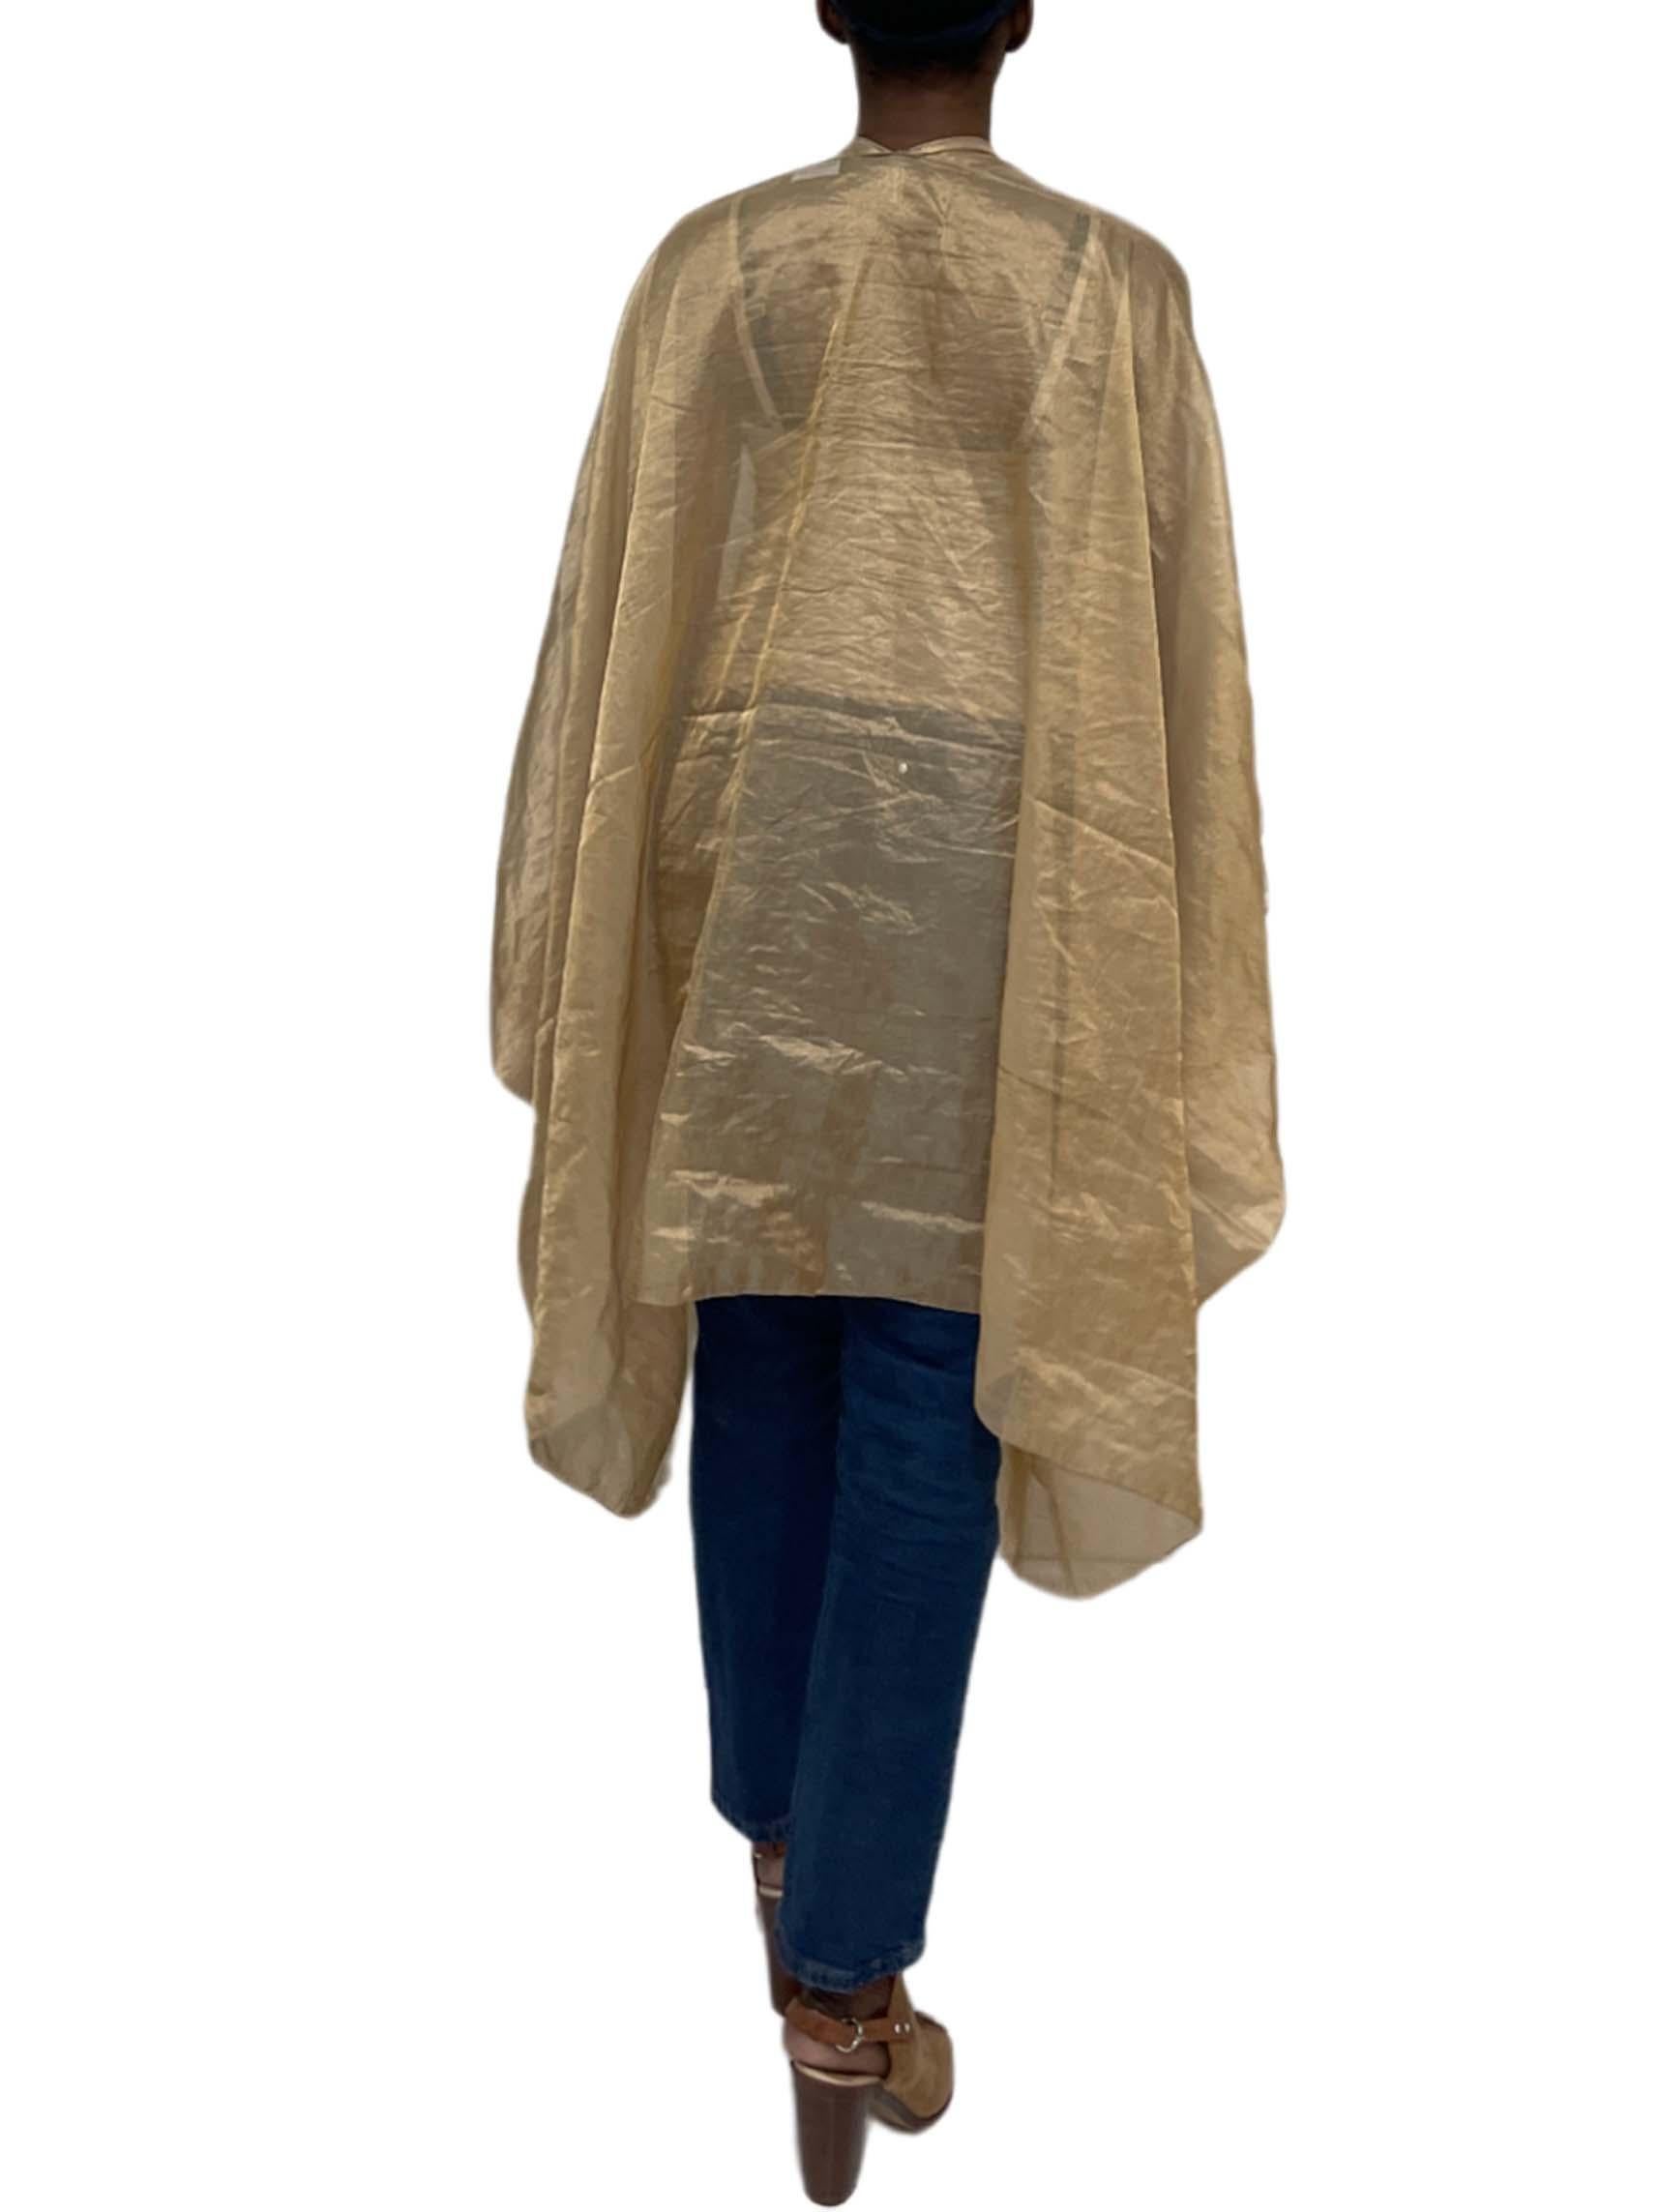 MORPHEW ATELIER Gold Metallic Silk Blend Chanel Fabric Cocoon Evening Wrap For Sale 3